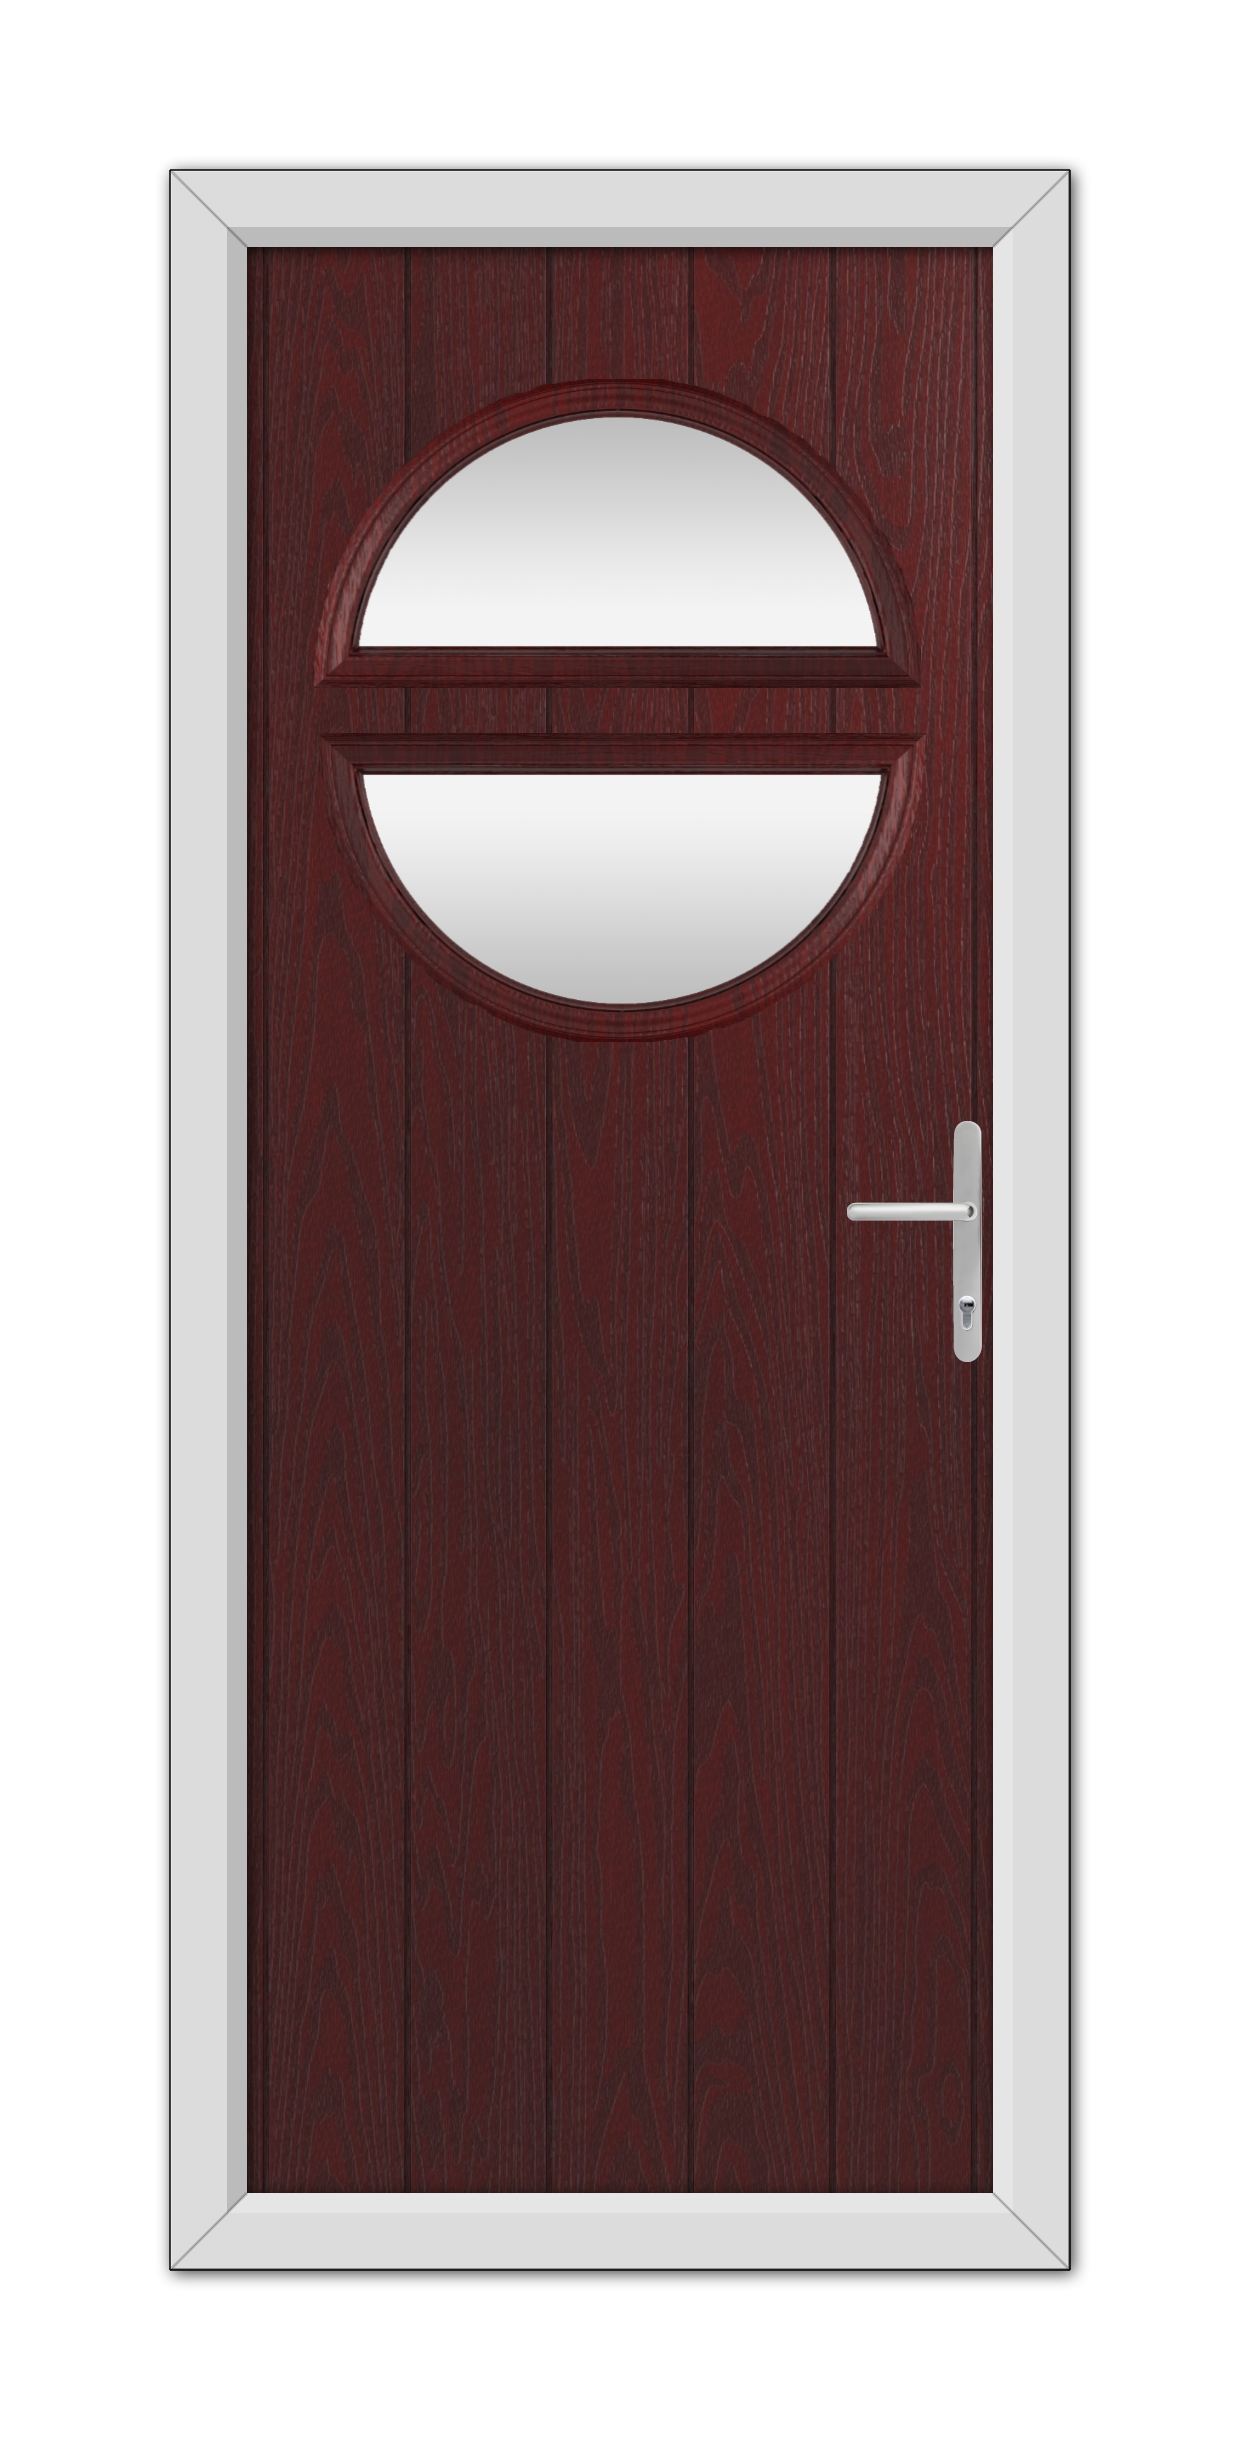 A Rosewood Kent Composite Door 48mm Timber Core with an oval glass window, framed in white, featuring a contemporary metal handle on the right side.